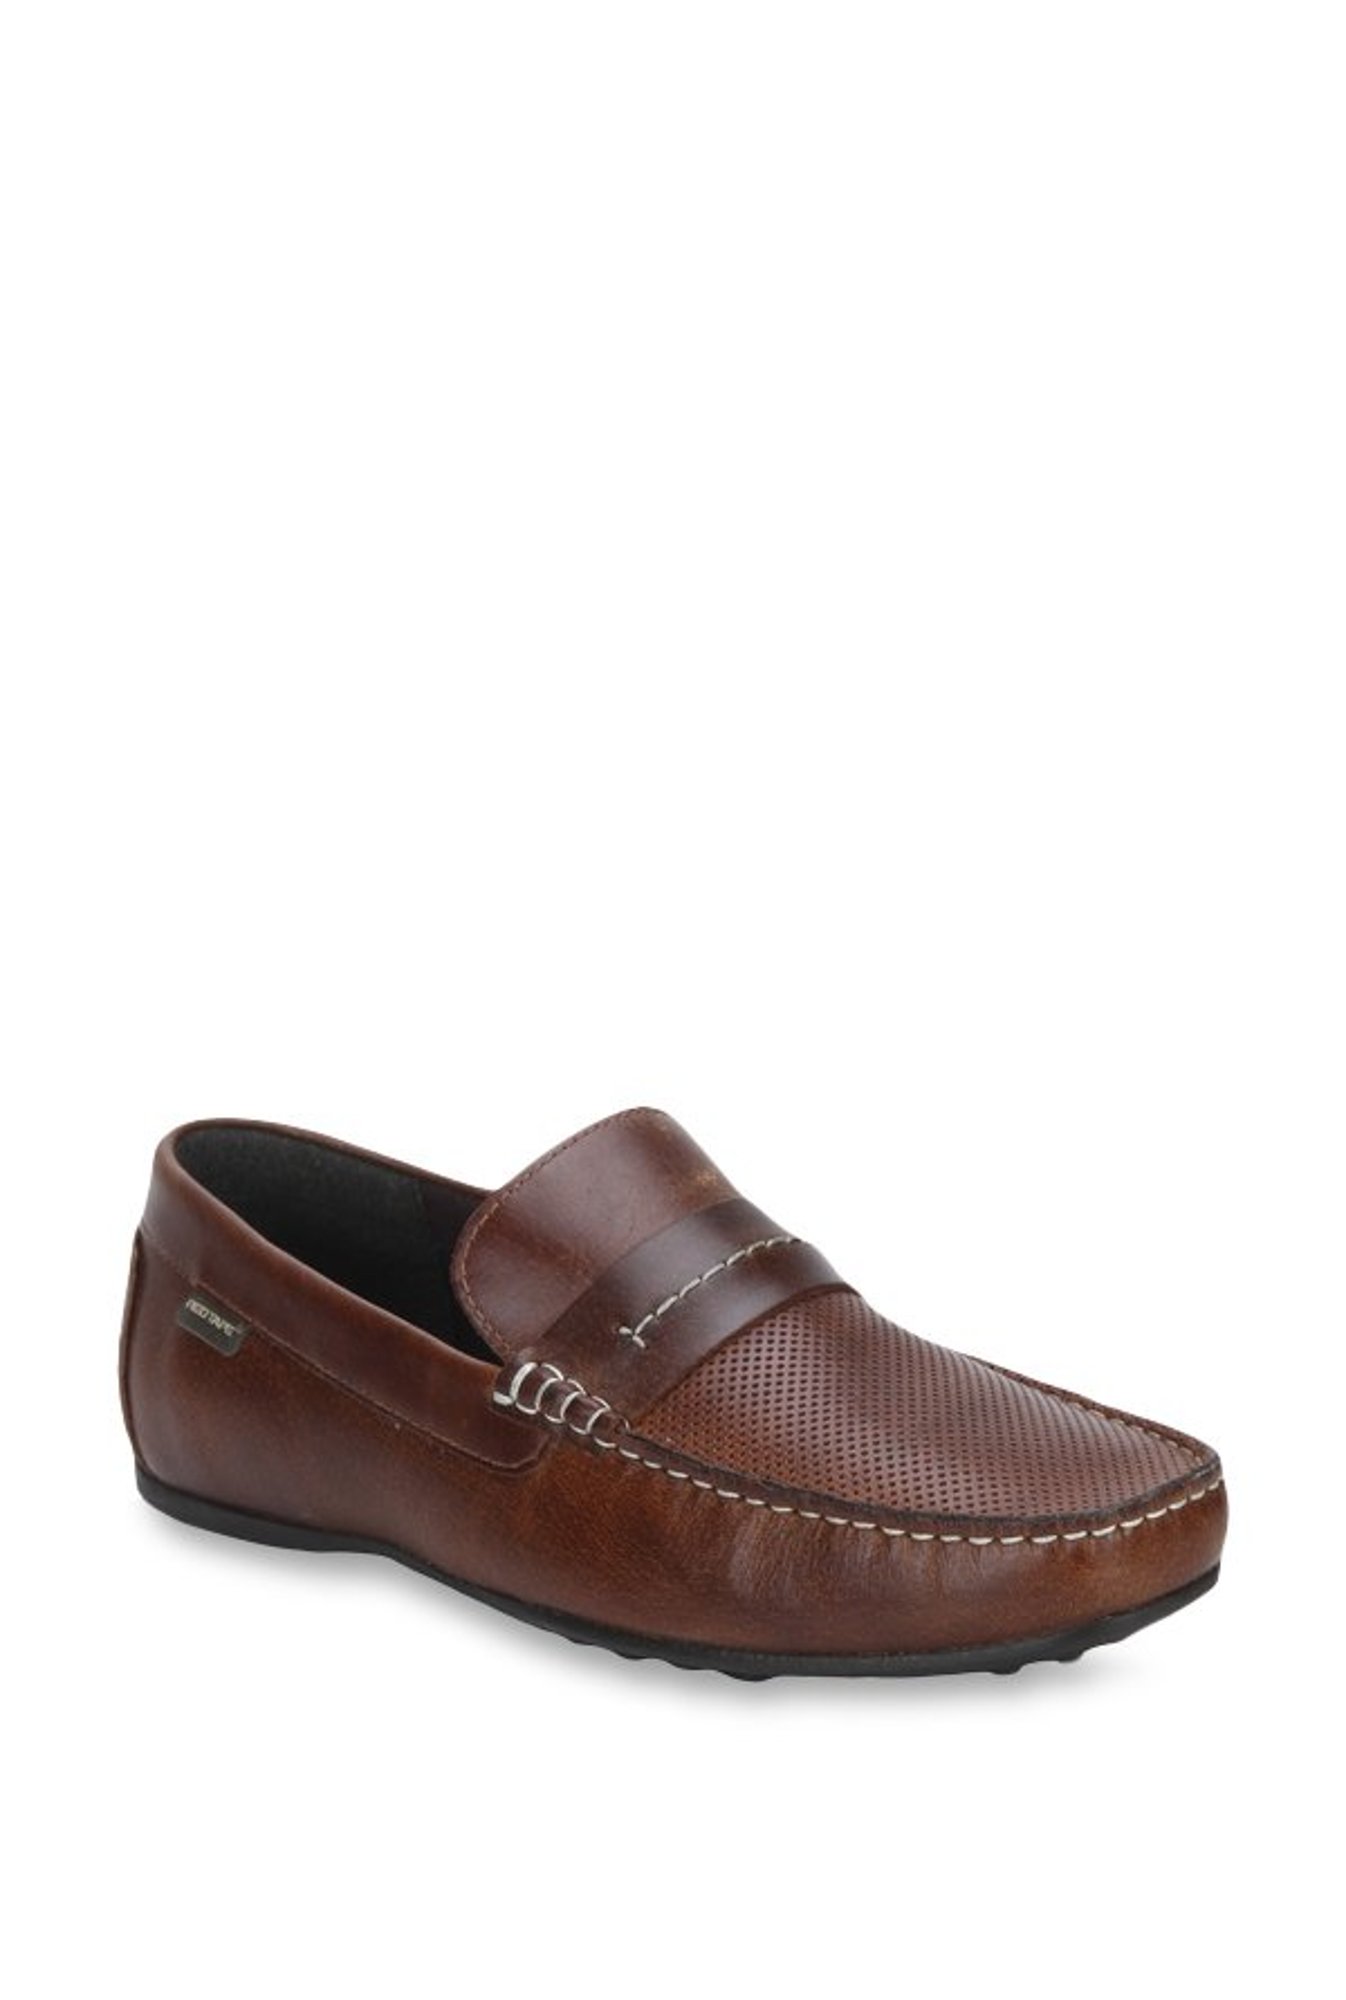 red tape loafers price